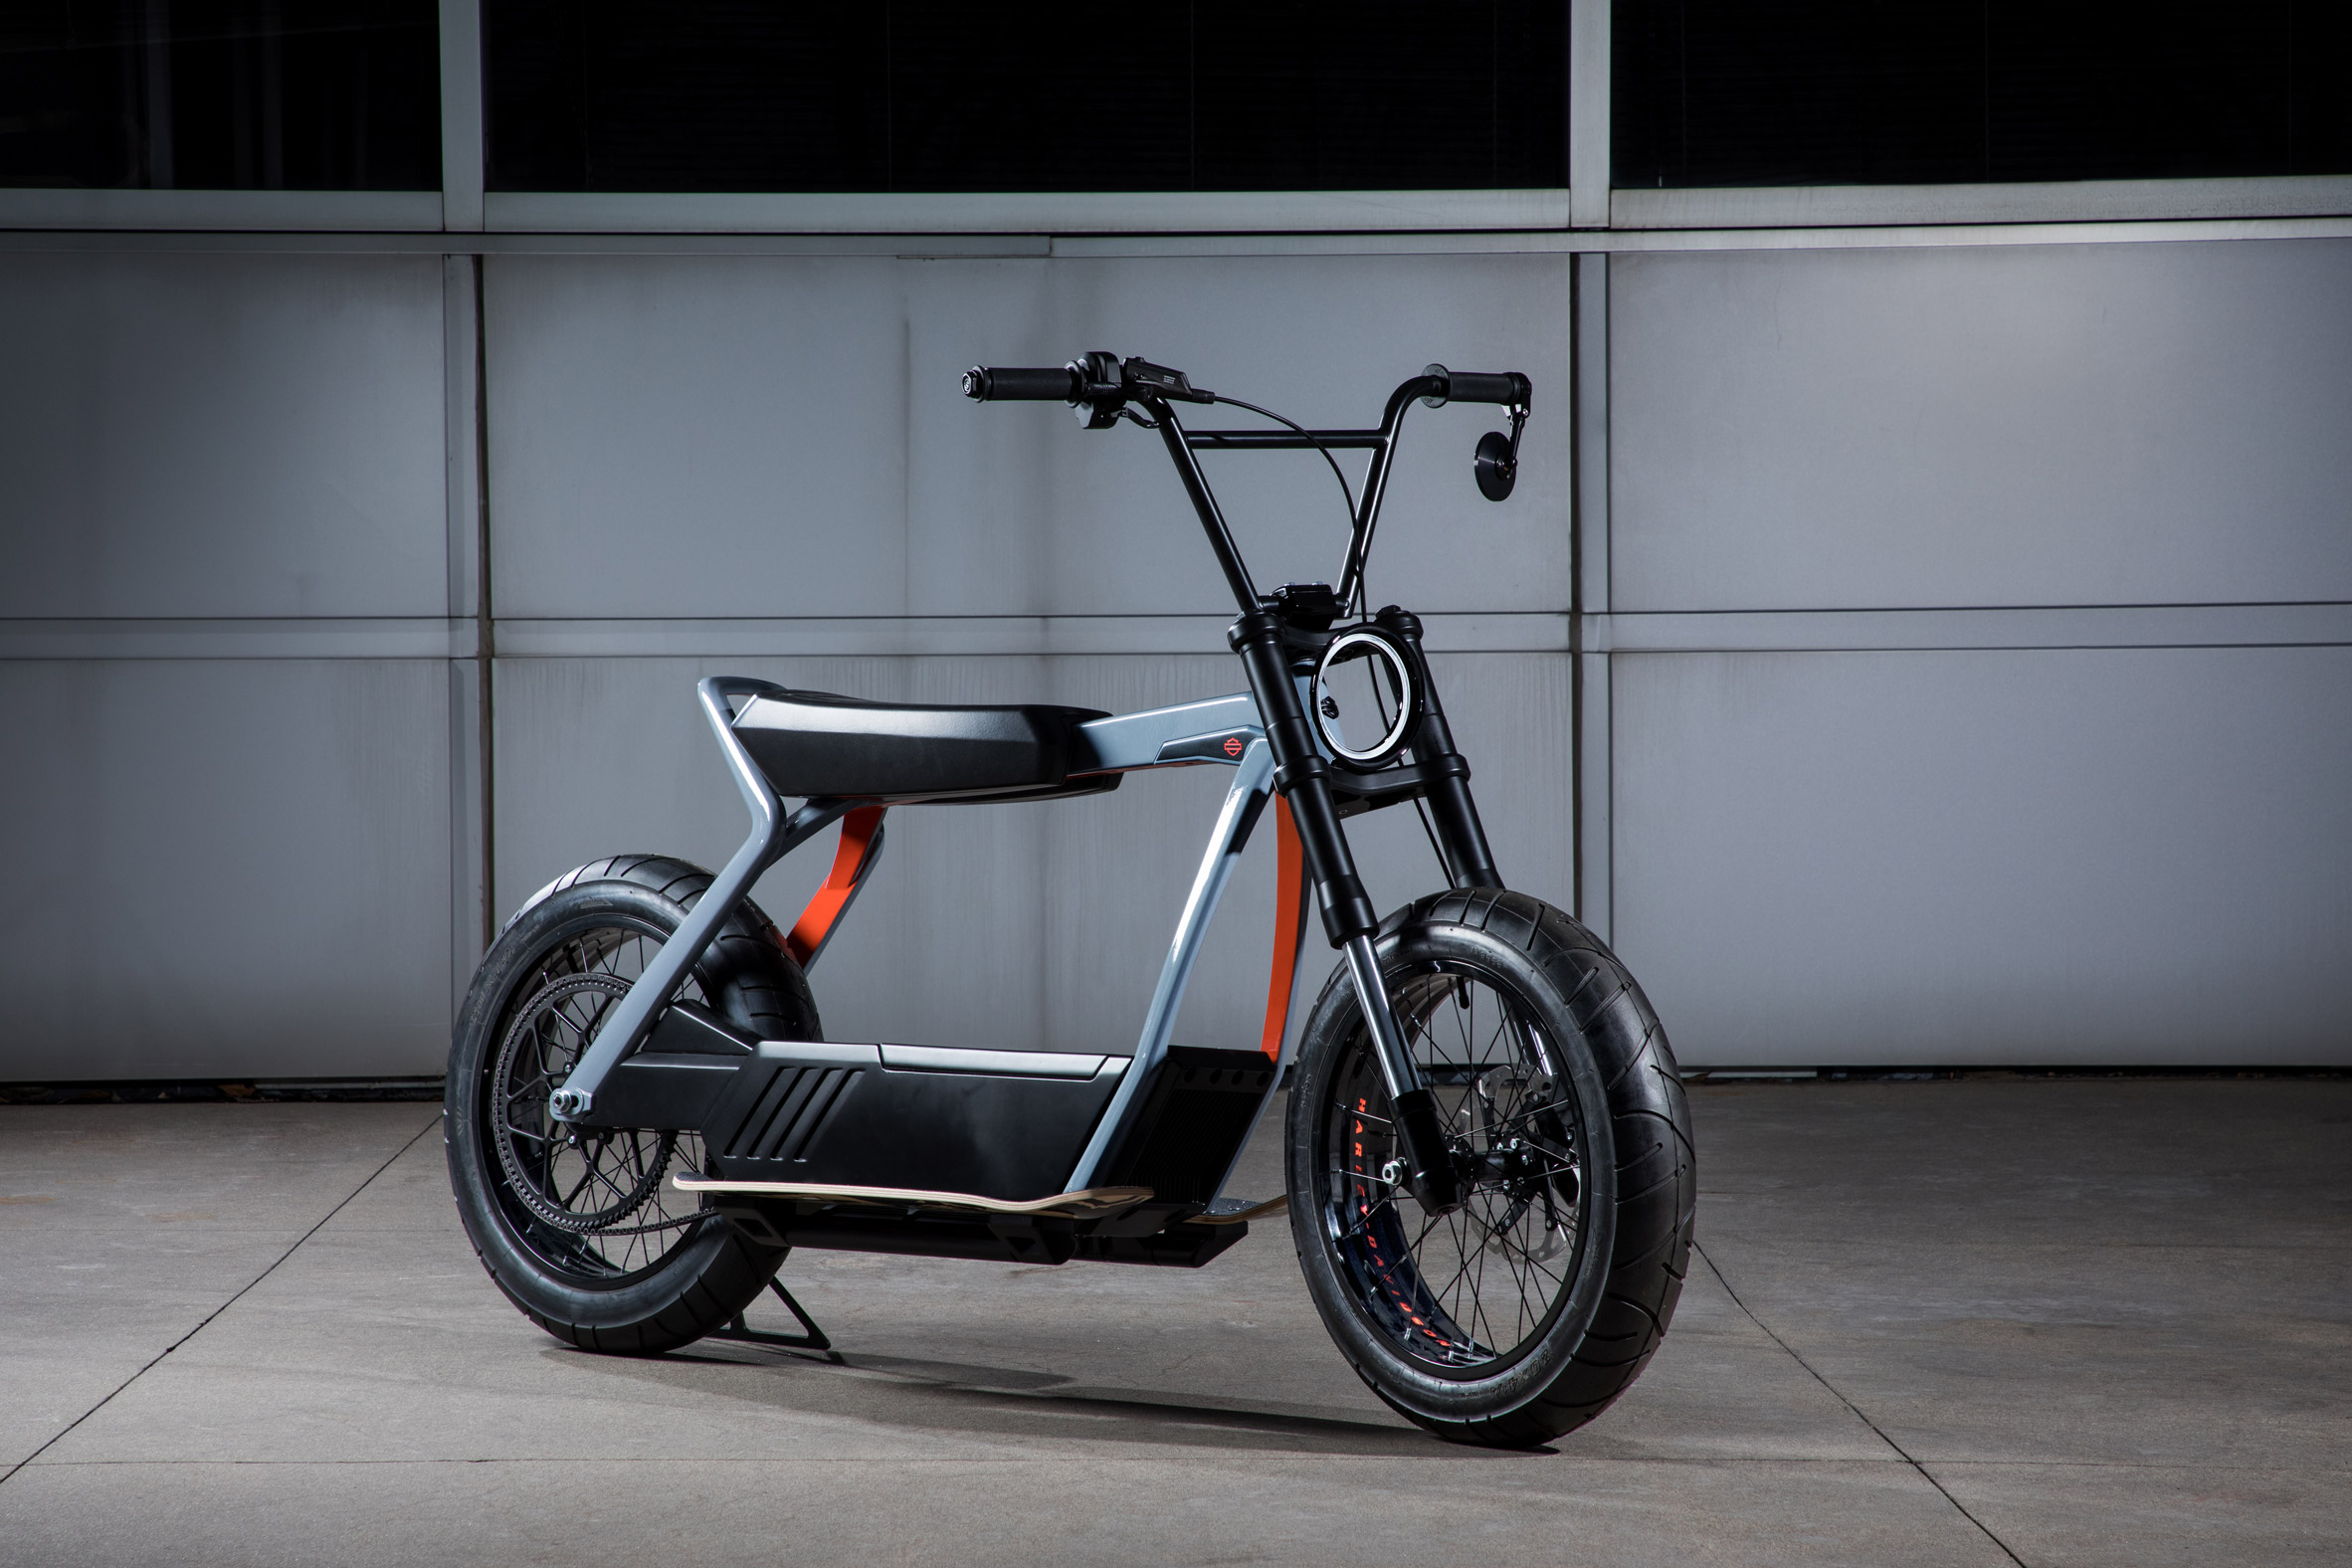 Harley-Davidson's latest electric scooter is designed for the city